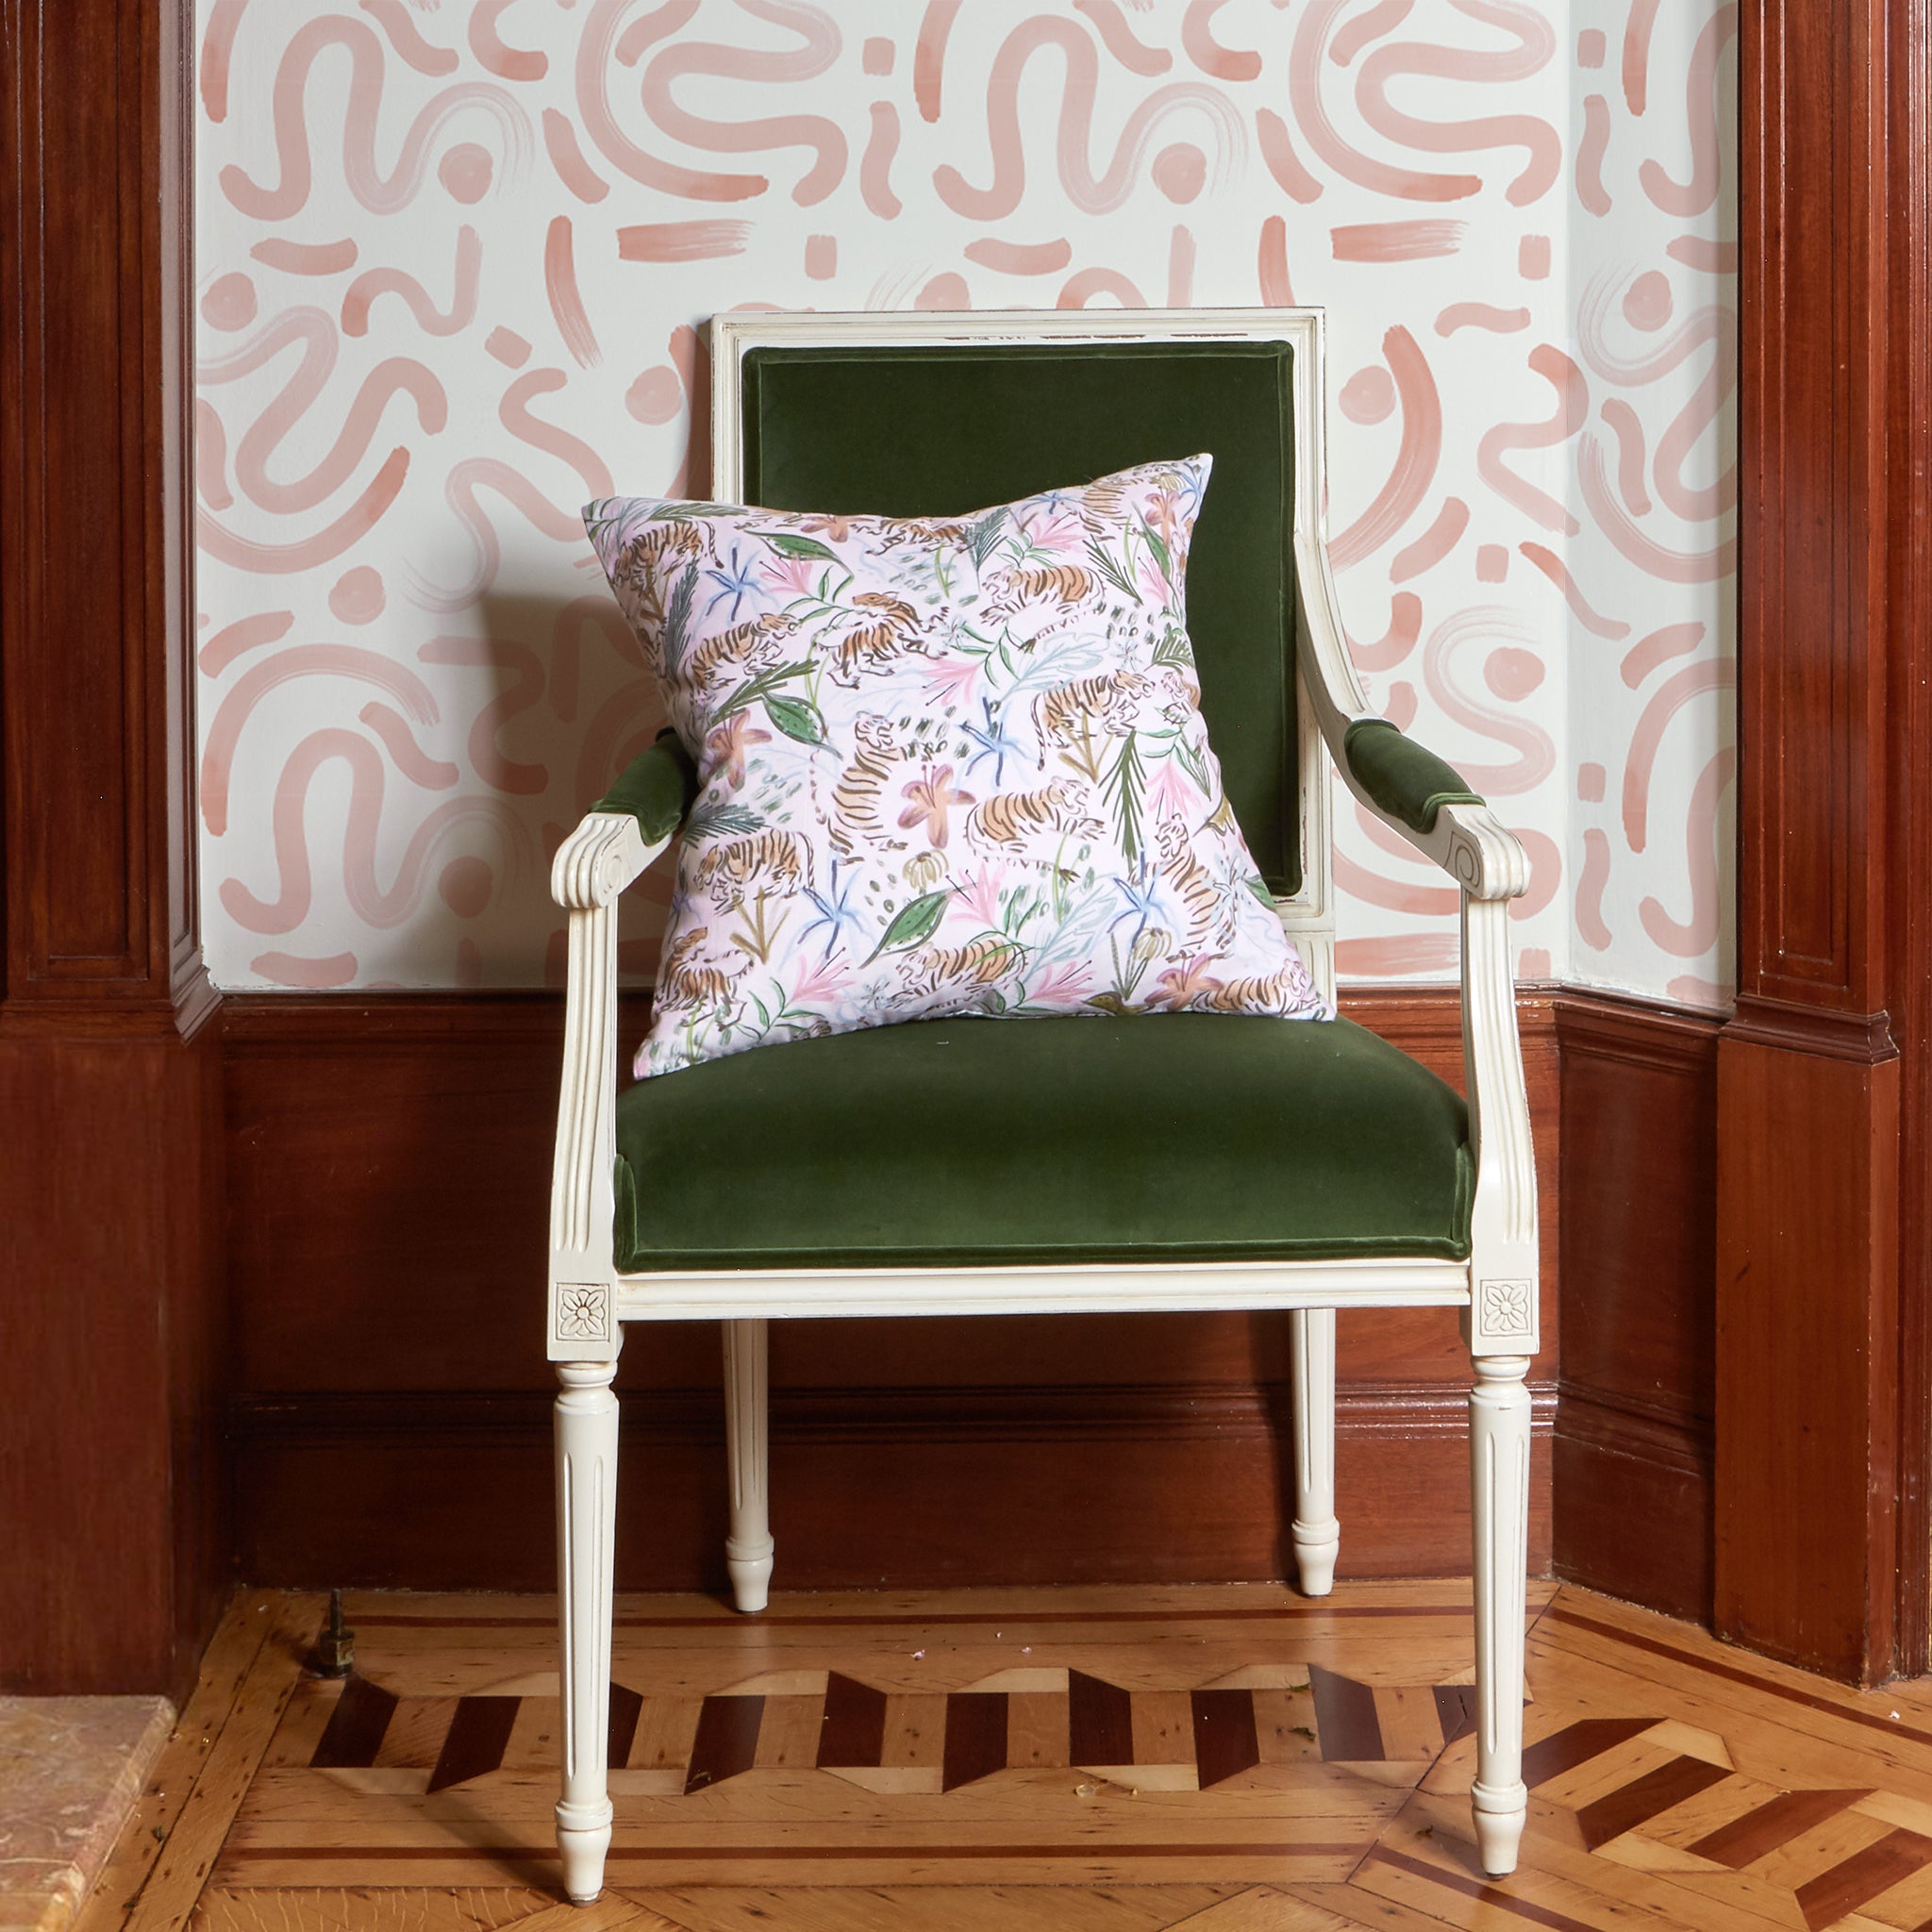 Green Velvet Chair Close-up with Pink Chinoiserie Printed Pillow and Pink Graphic Printed Wallpaper